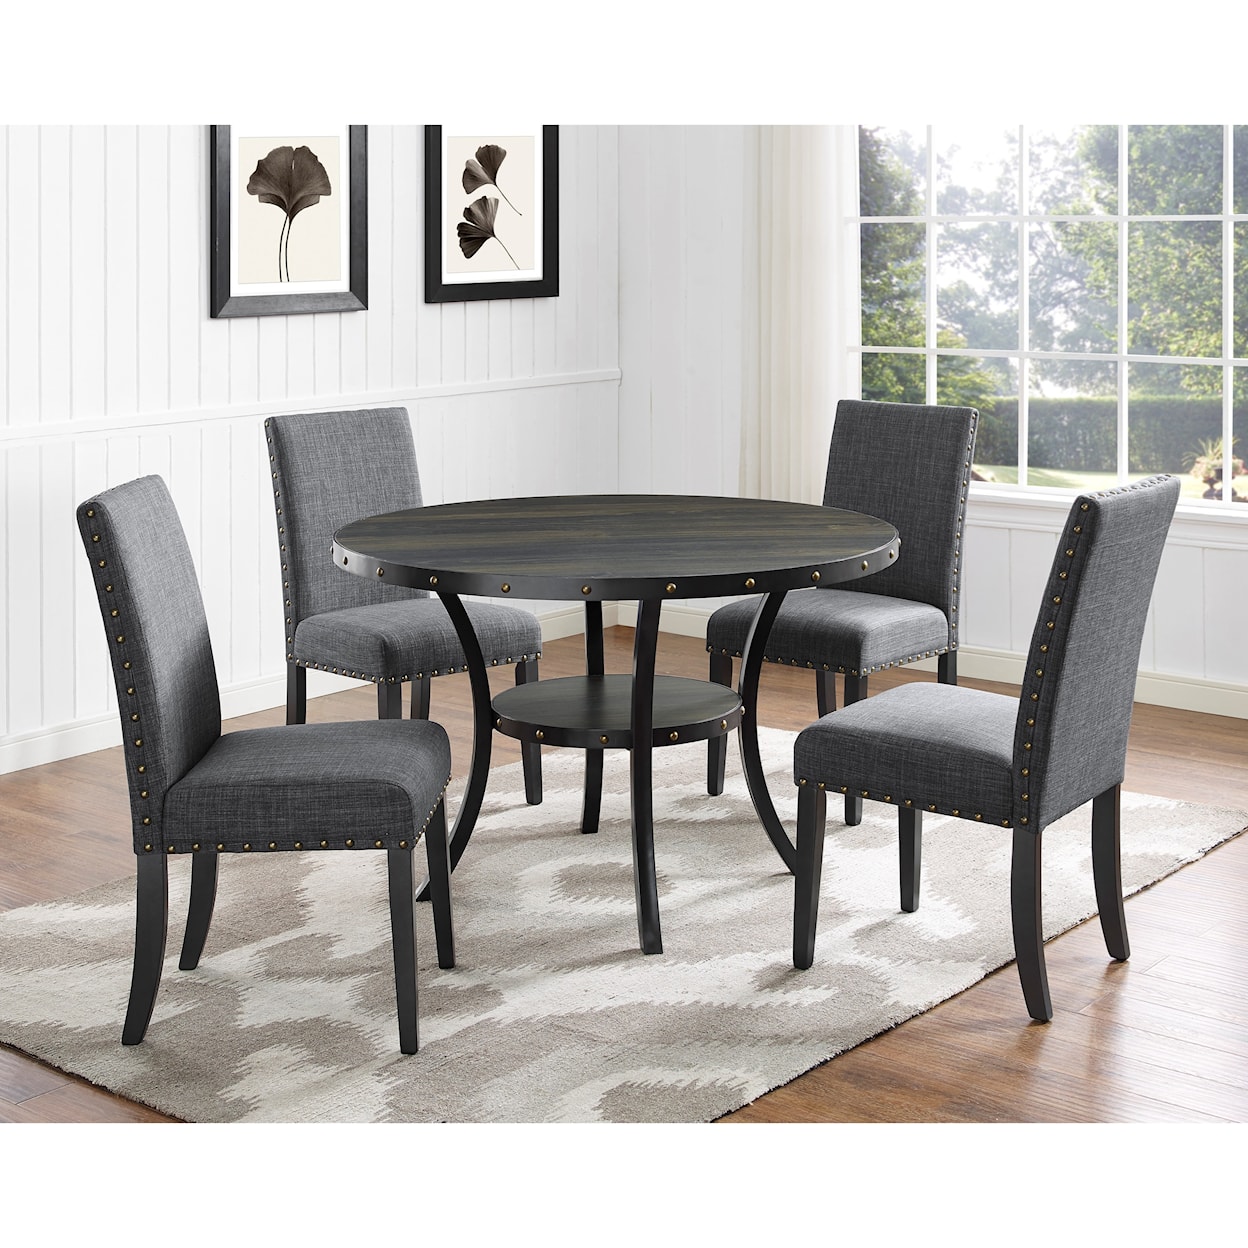 New Classic Furniture Crispin 5-Piece Table and Chair Set